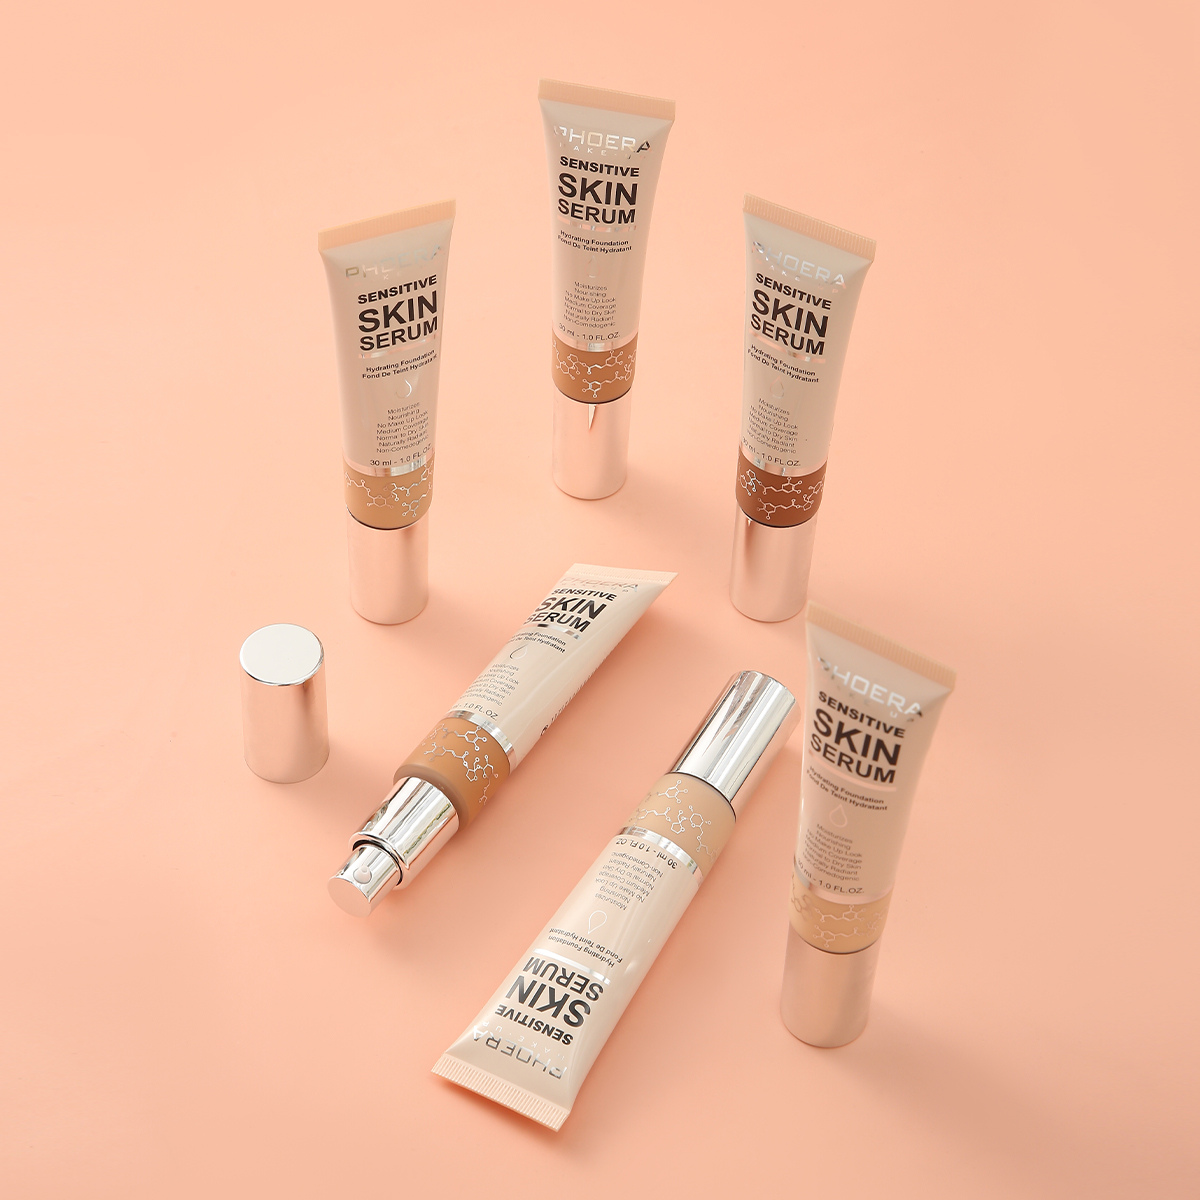 Hydrating Skincare Foundation with Hyaluronic acid